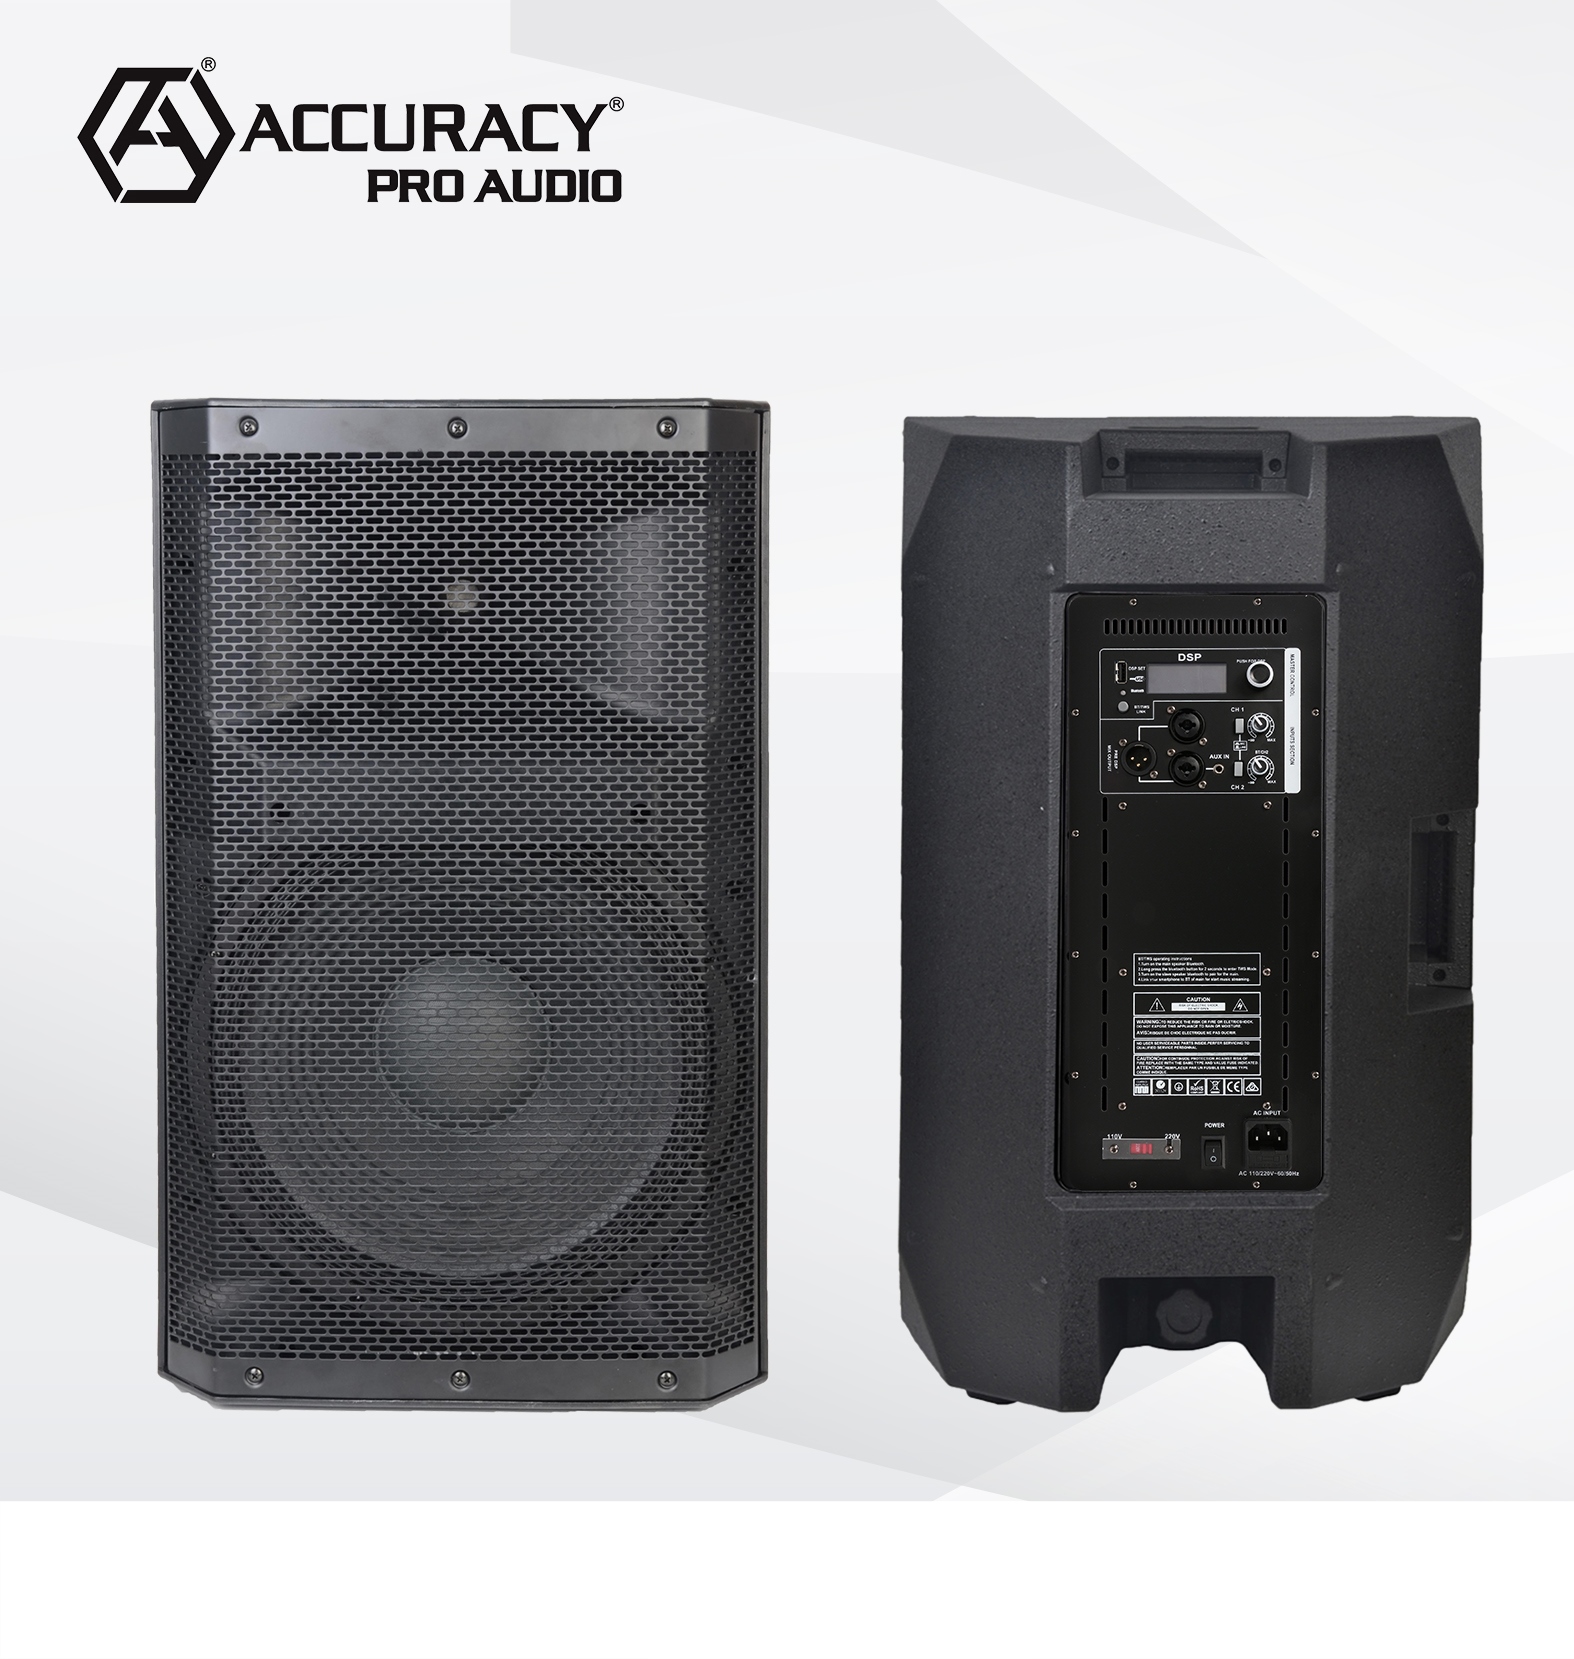 Accuracy pro audio 15 -  CAC15D3